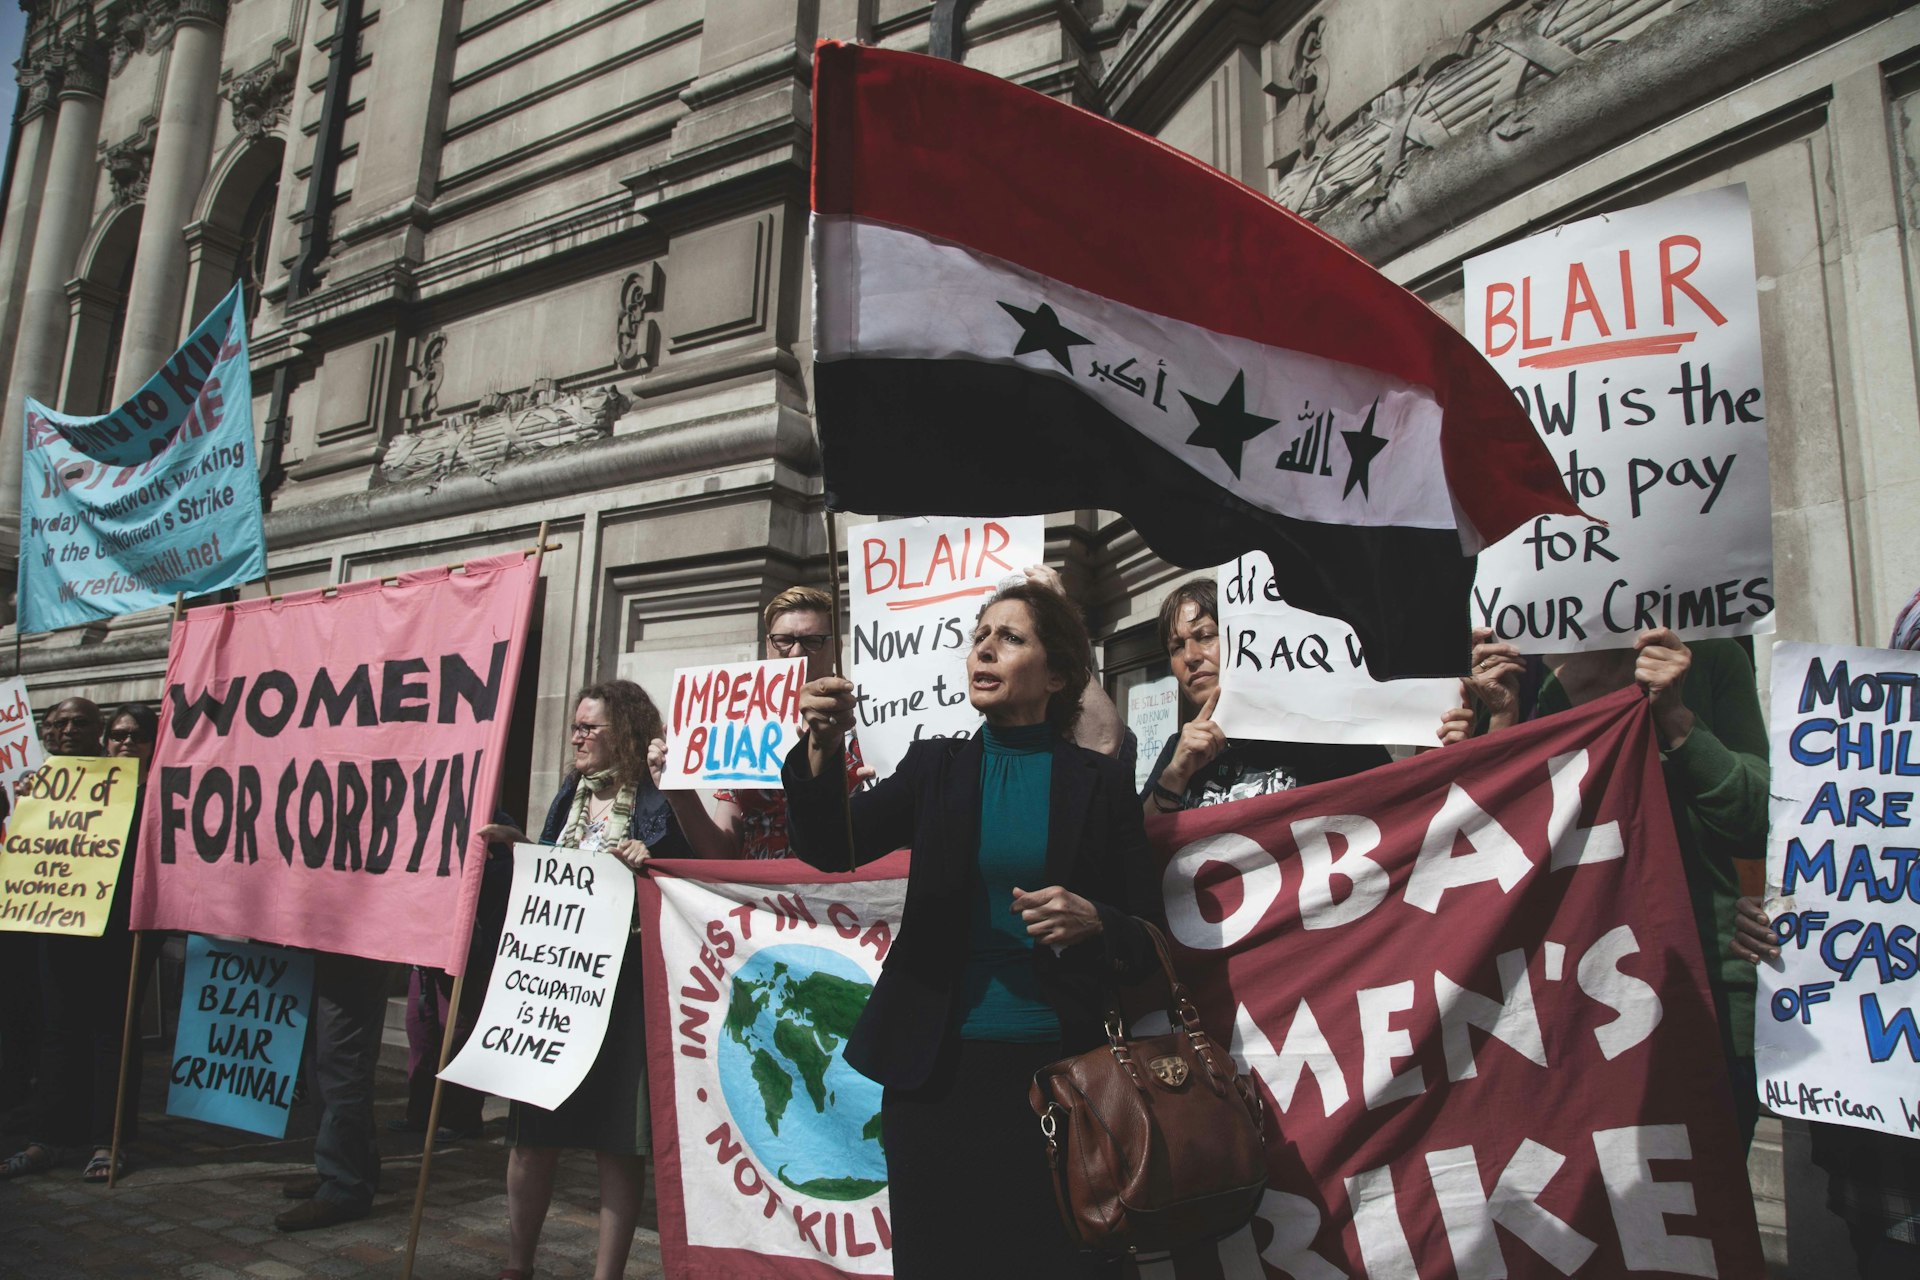 Despite the invasion, there are lessons to be learnt from Italy's stop the Iraq war movement